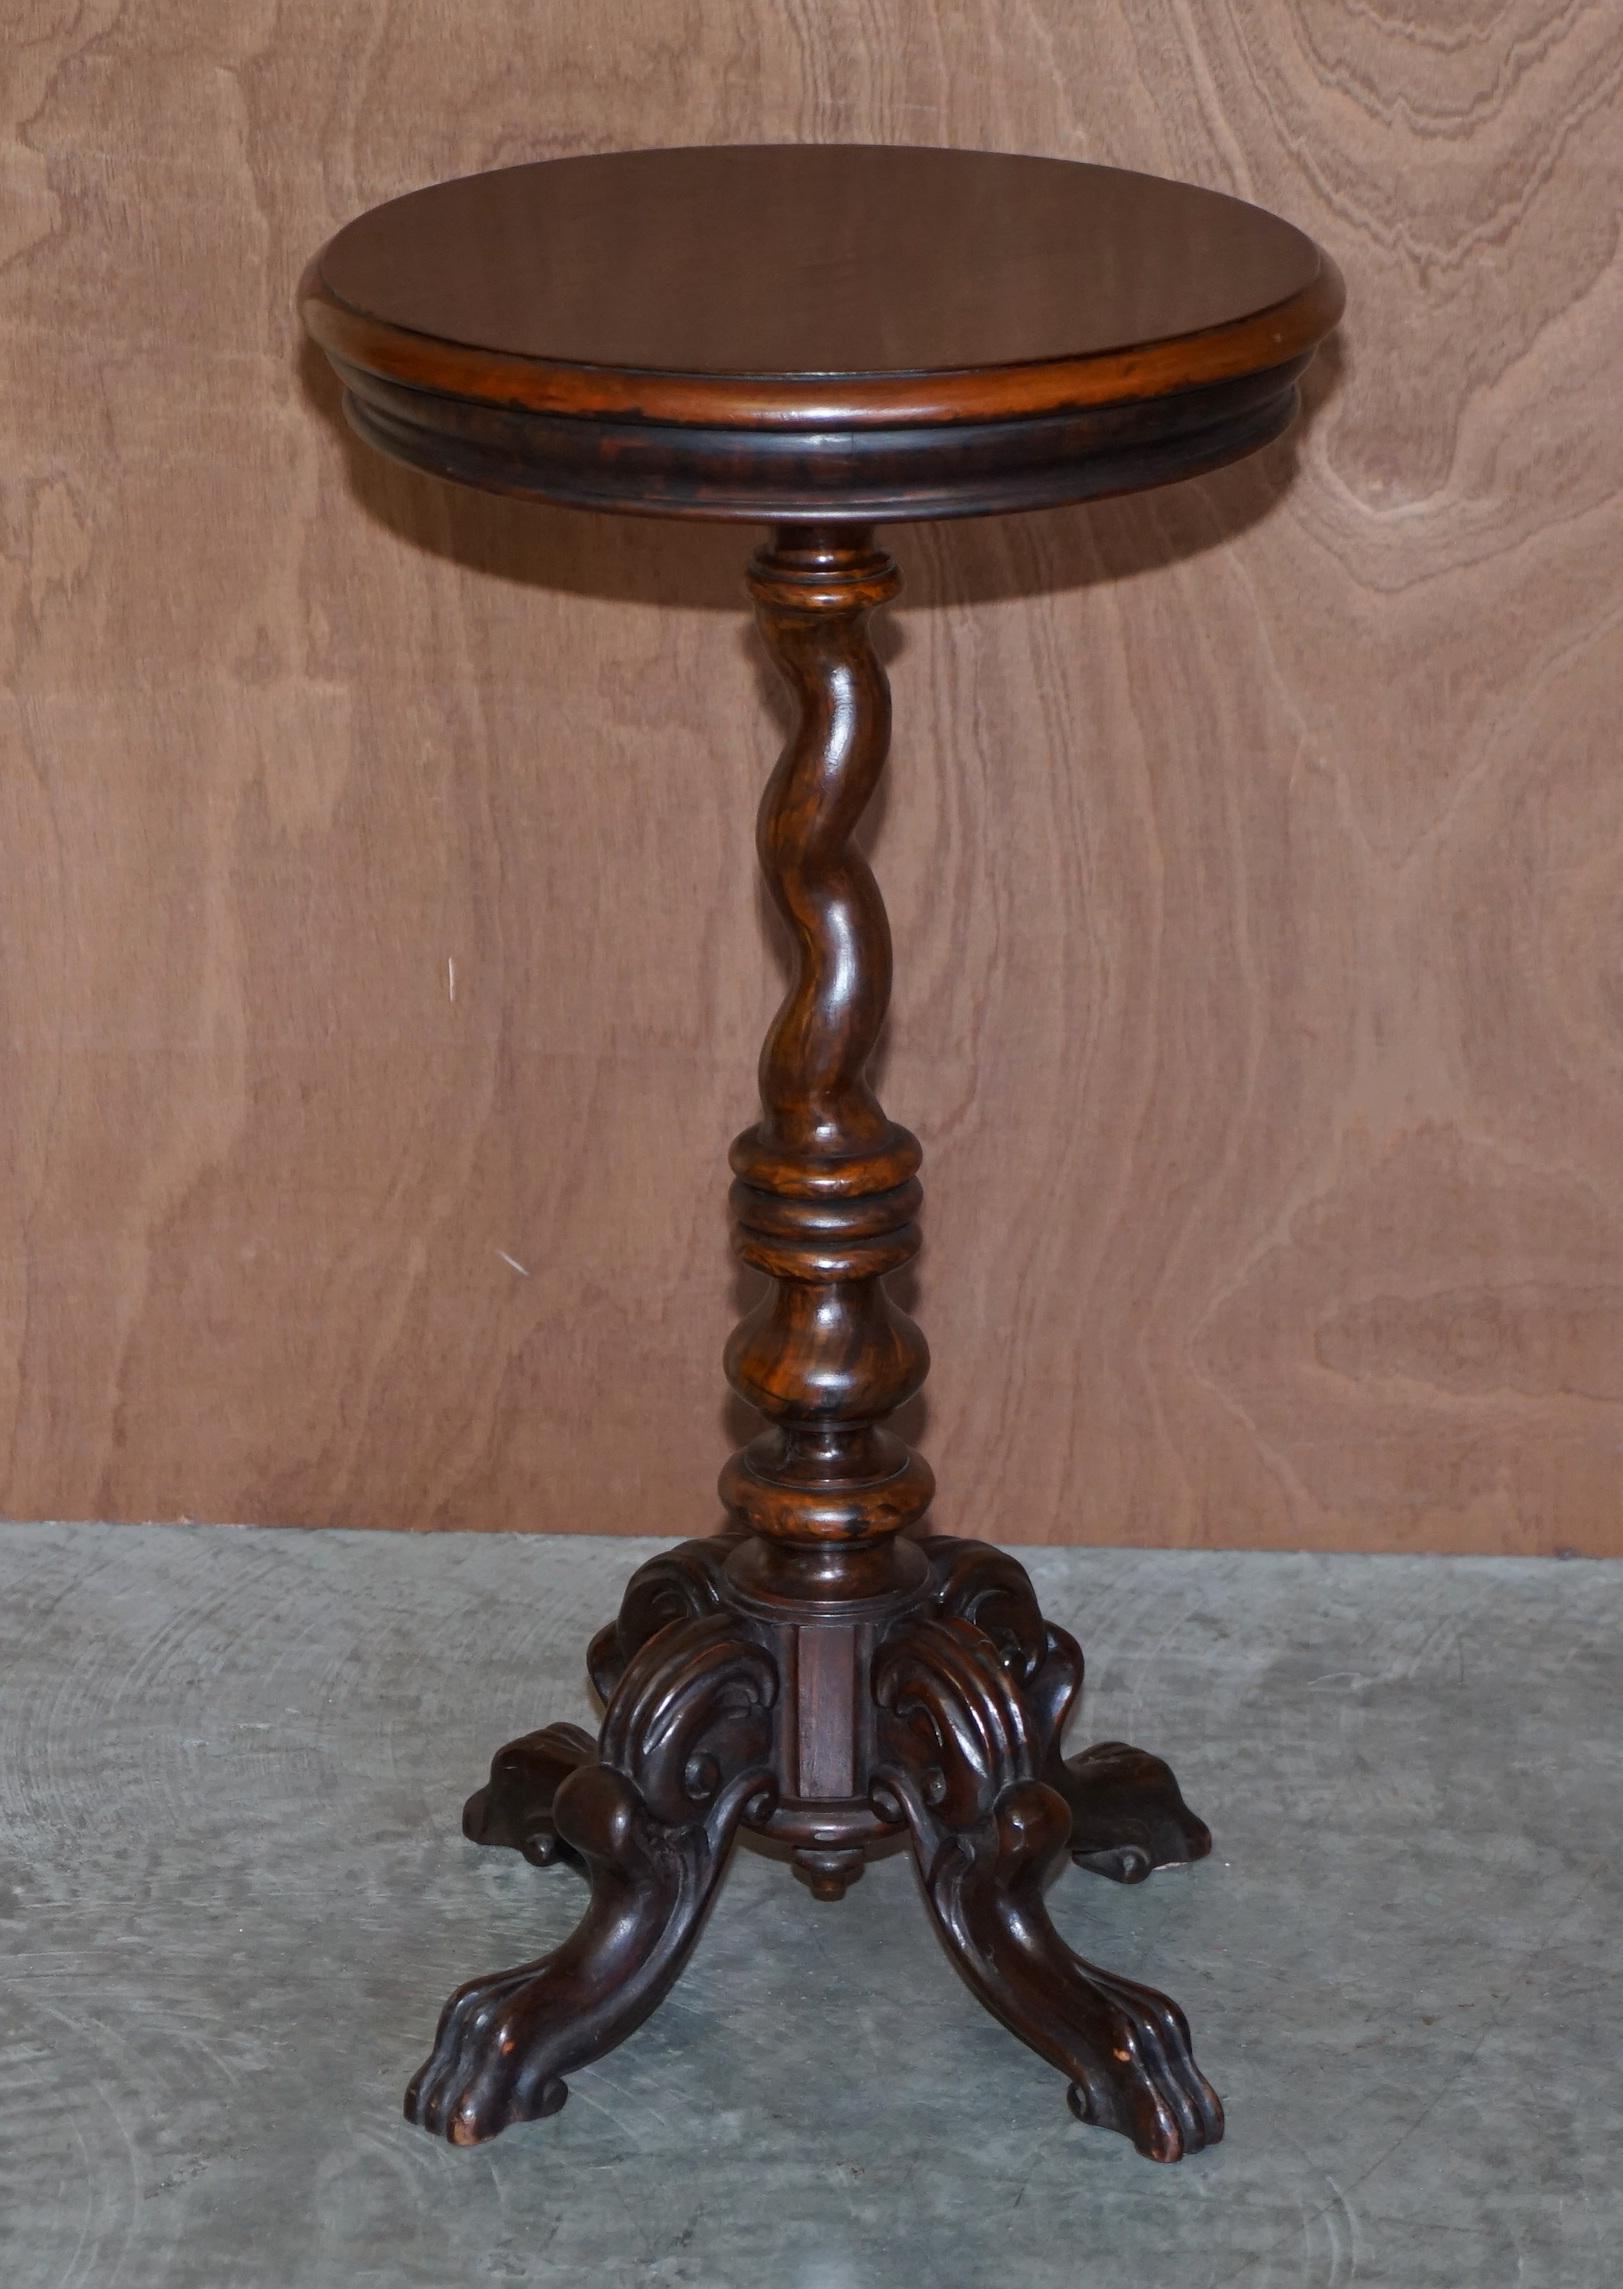 We are delighted to offer for sale this stunning original restored Victorian circa 1900 side occasional table with ornately carved legs and barley twit column base 

A very good looking and well made piece, ideally suited for serving lunch and so